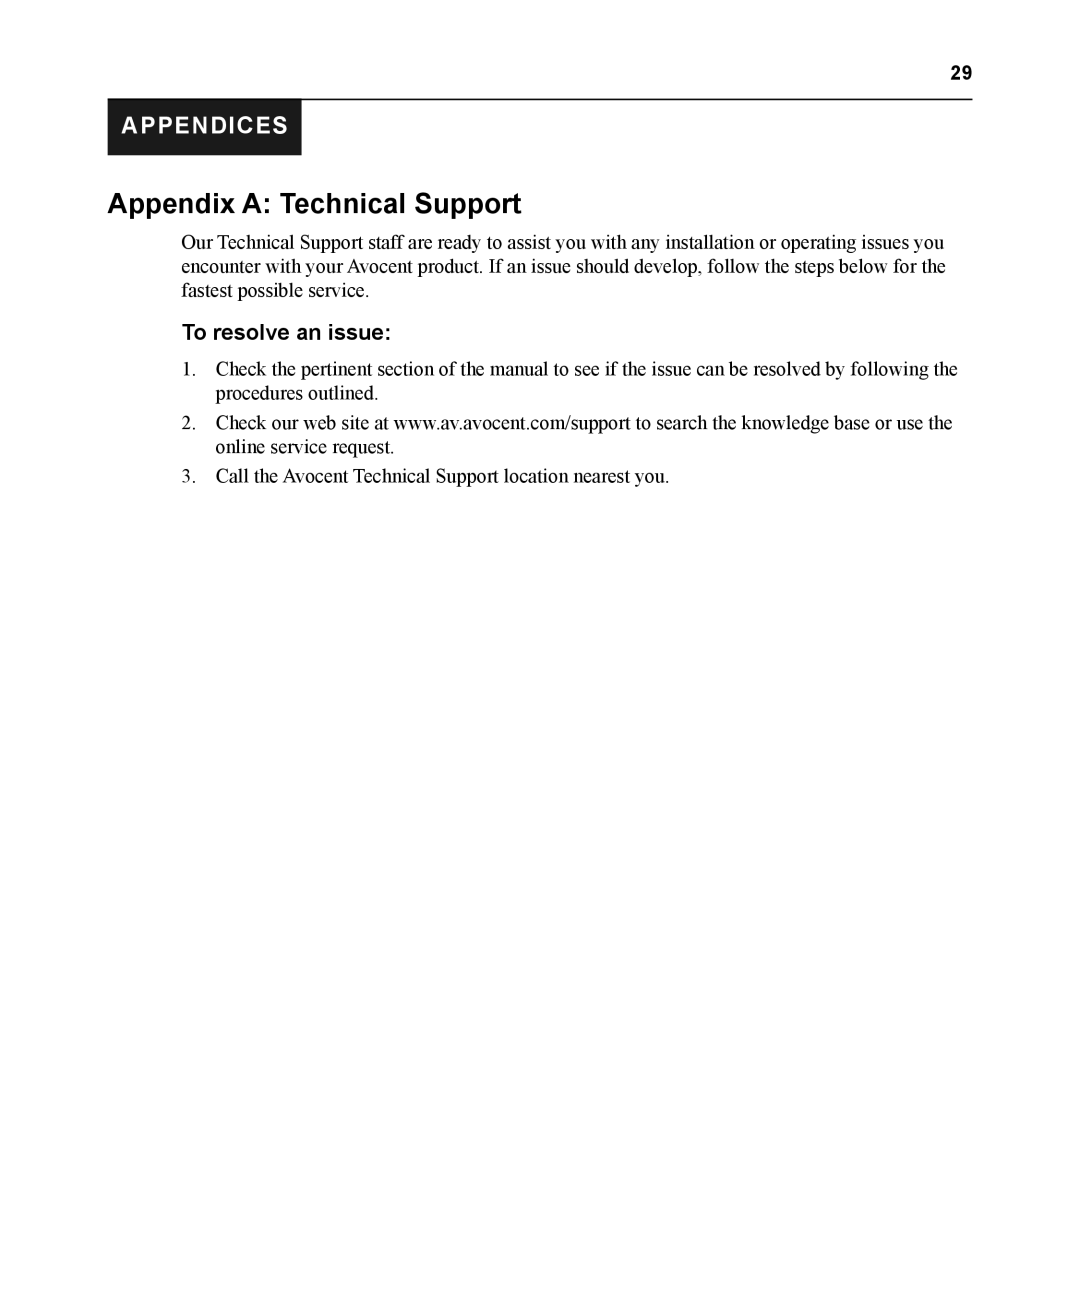 Avocent EMS1000P manual Appendix A Technical Support, Appendices, To resolve an issue 